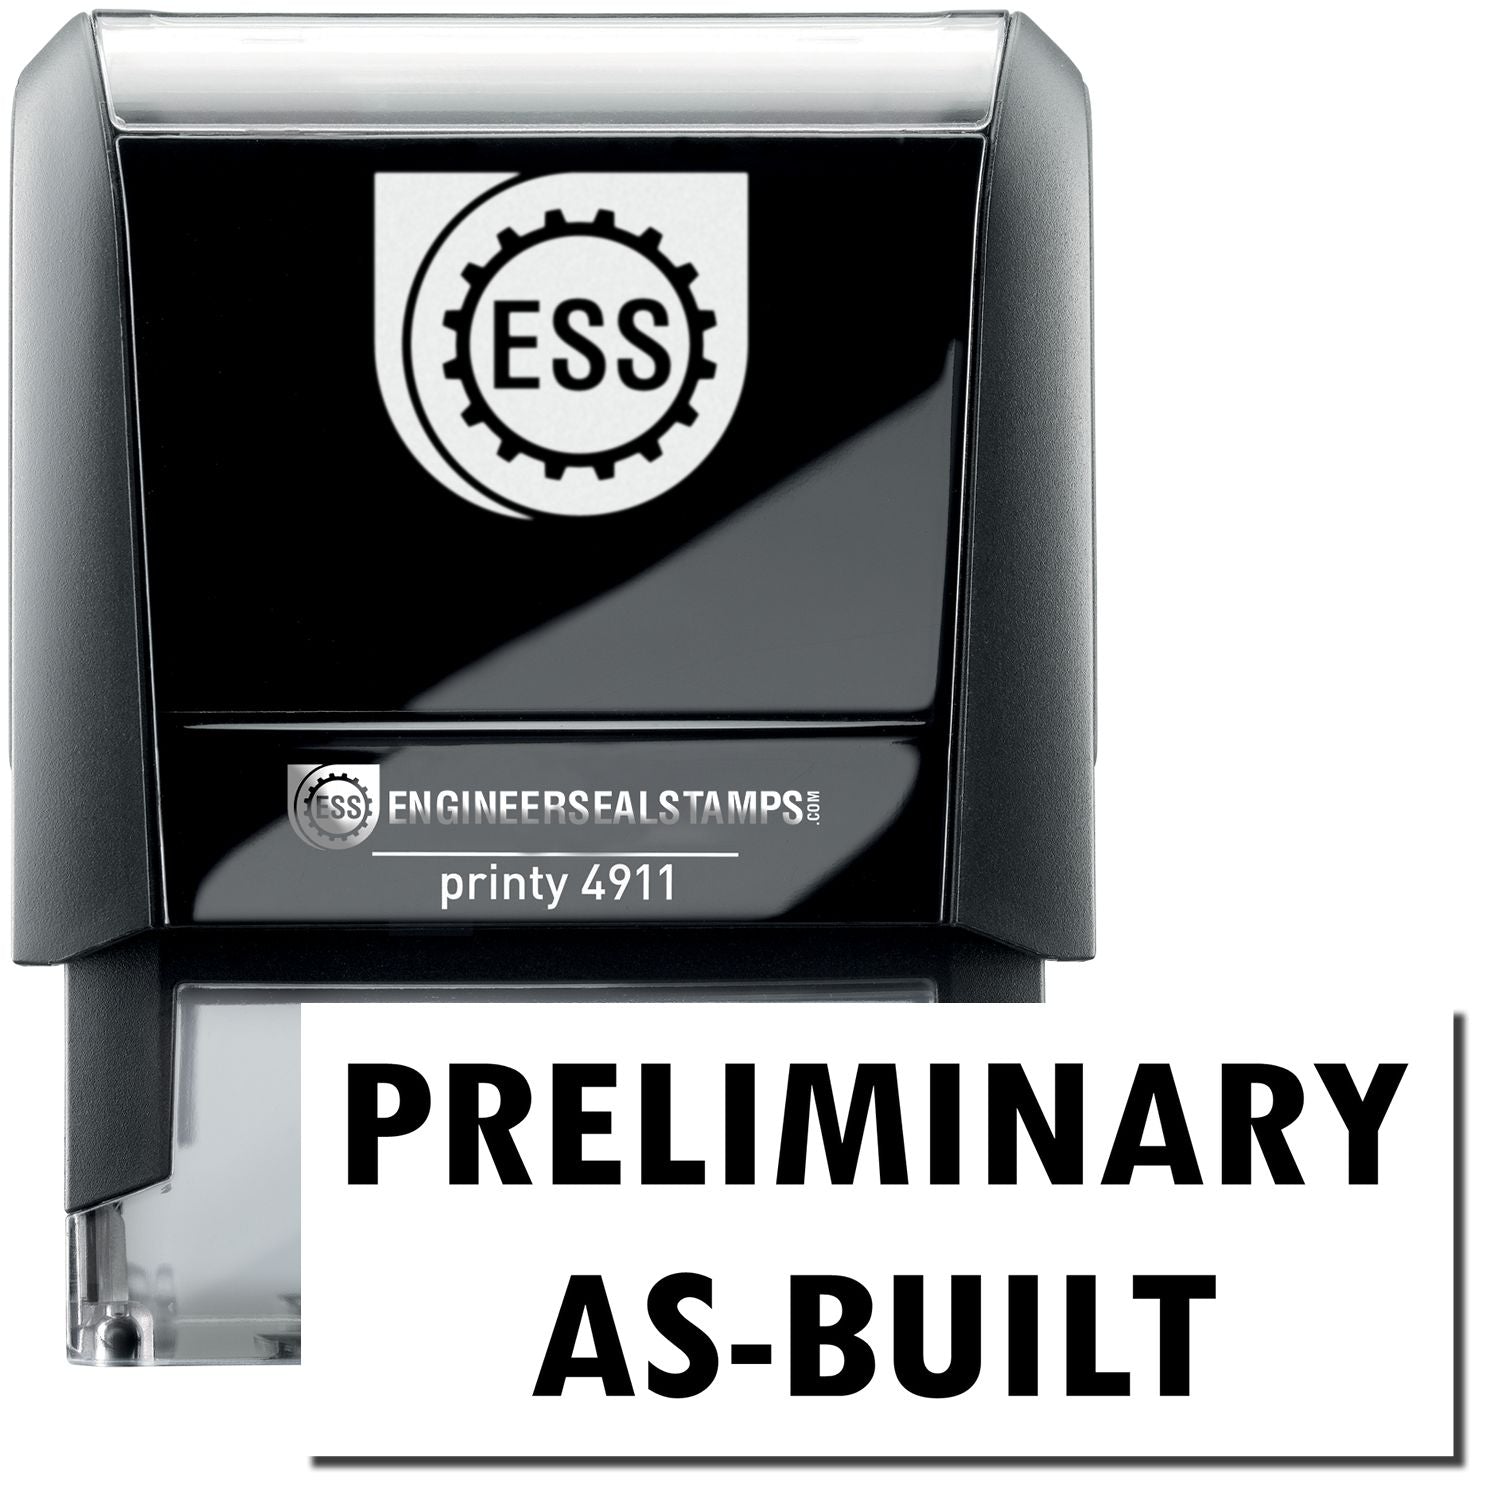 A self-inking stamp with a stamped image showing how the text "PRELIMINARY AS-BUILT" is displayed after stamping.